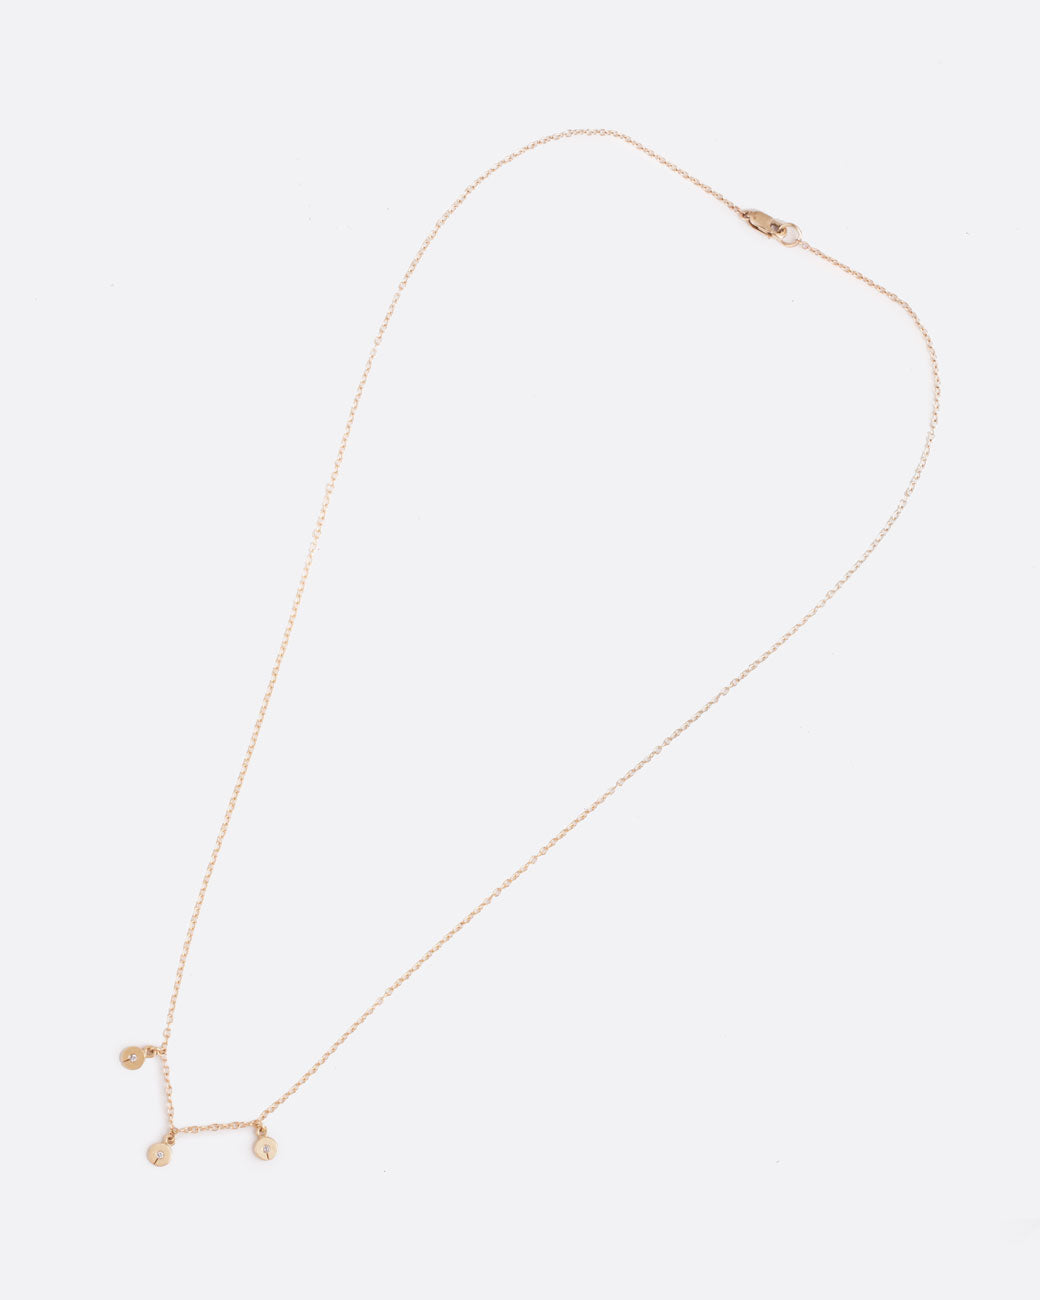 Far out birds eye view of necklace with three single grey diamonds with a slit in the bottom hanging from a yellow gold chain.